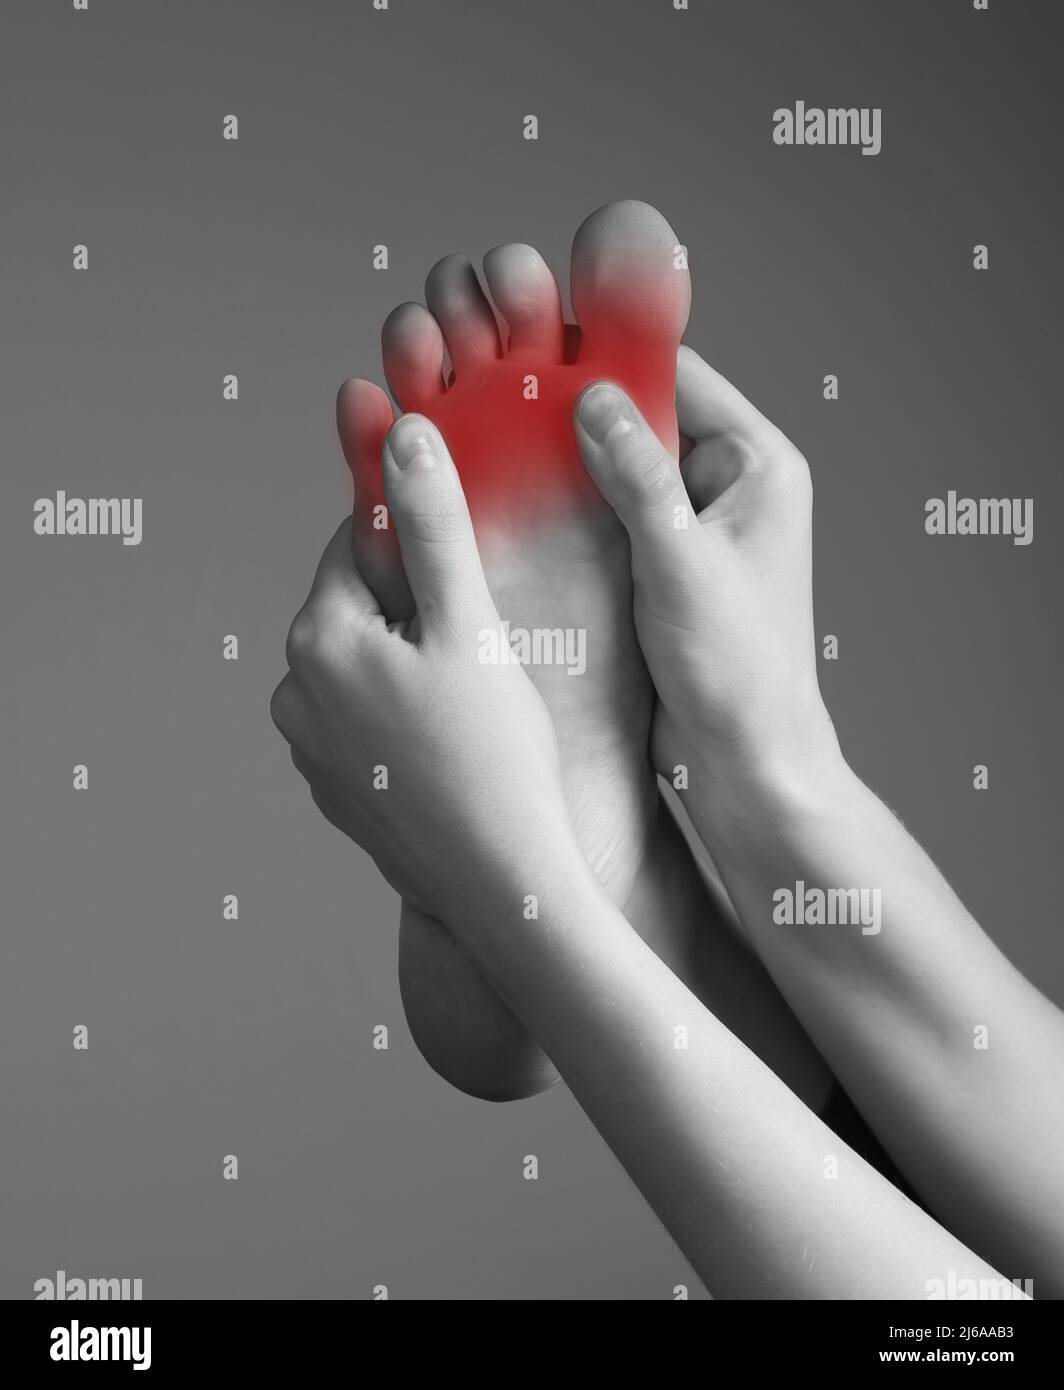 Toe pain caused by overuse, injury, arthritis, bunion, calluses, tight shoes. Woman hands holding foot with red spot. Black and white. Orthopedic complaints and health problems concept. photo Stock Photo